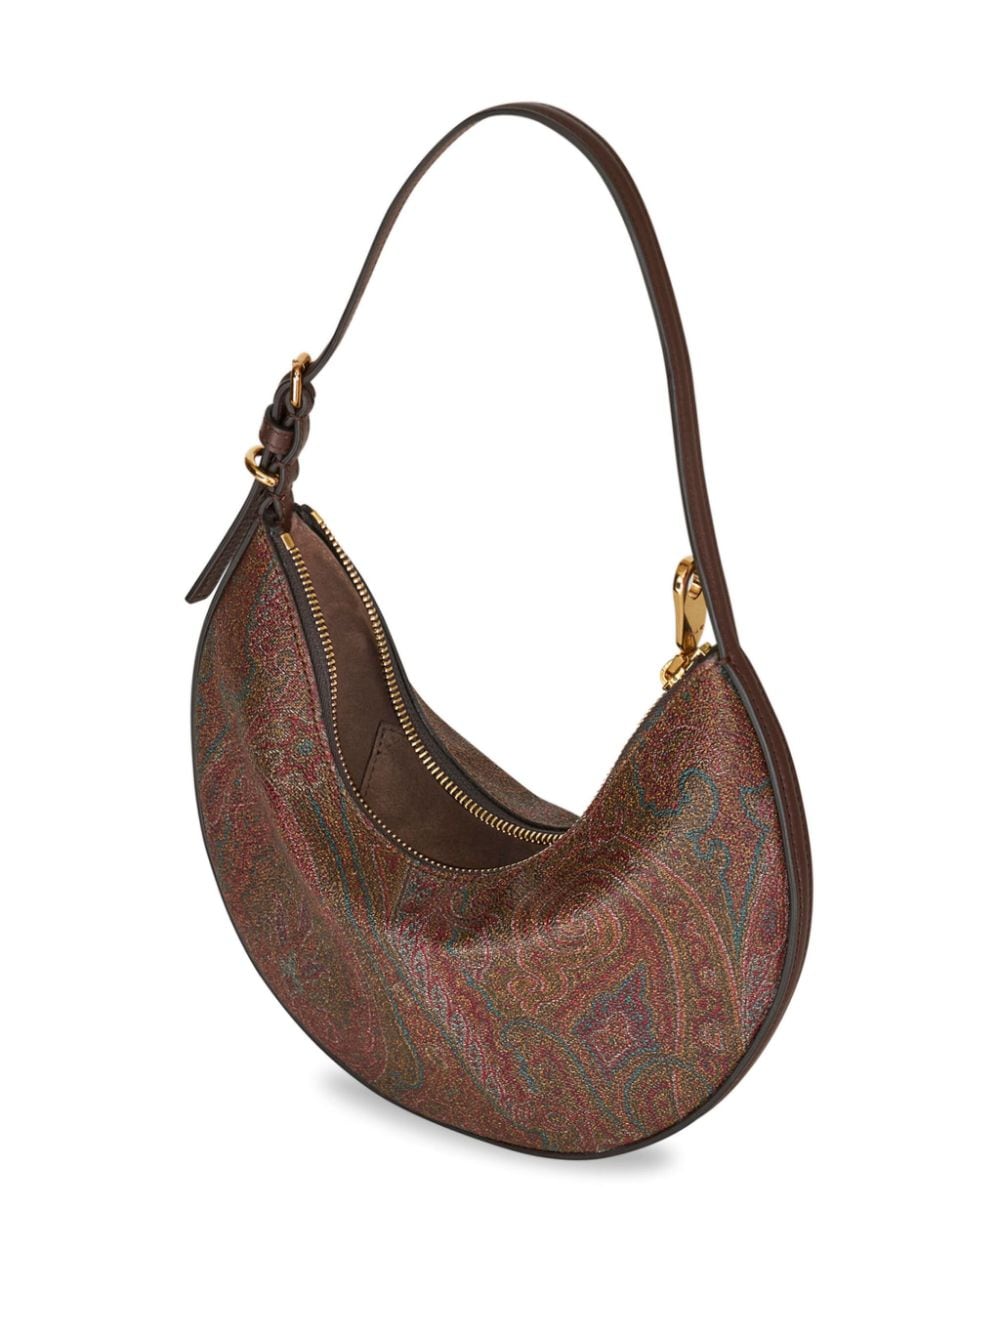 ETRO Brown Multicolor Paisley Print Small Hobo Shoulder Bag with Gold-Tone Hardware